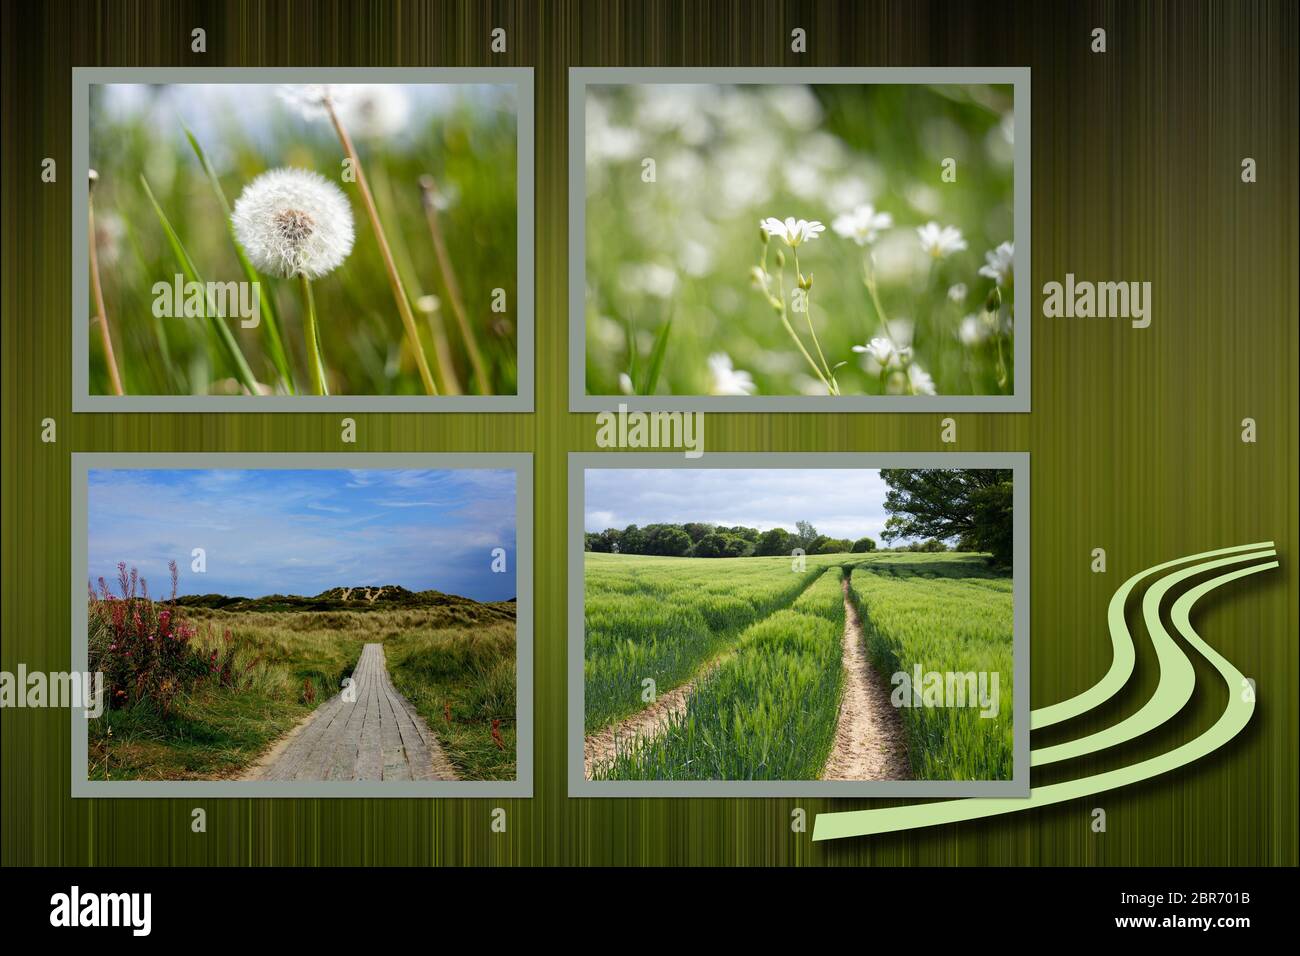 Collage of rural calm summer field landscape and summer flowers on green abstract background with icon of road going to horison Stock Photo